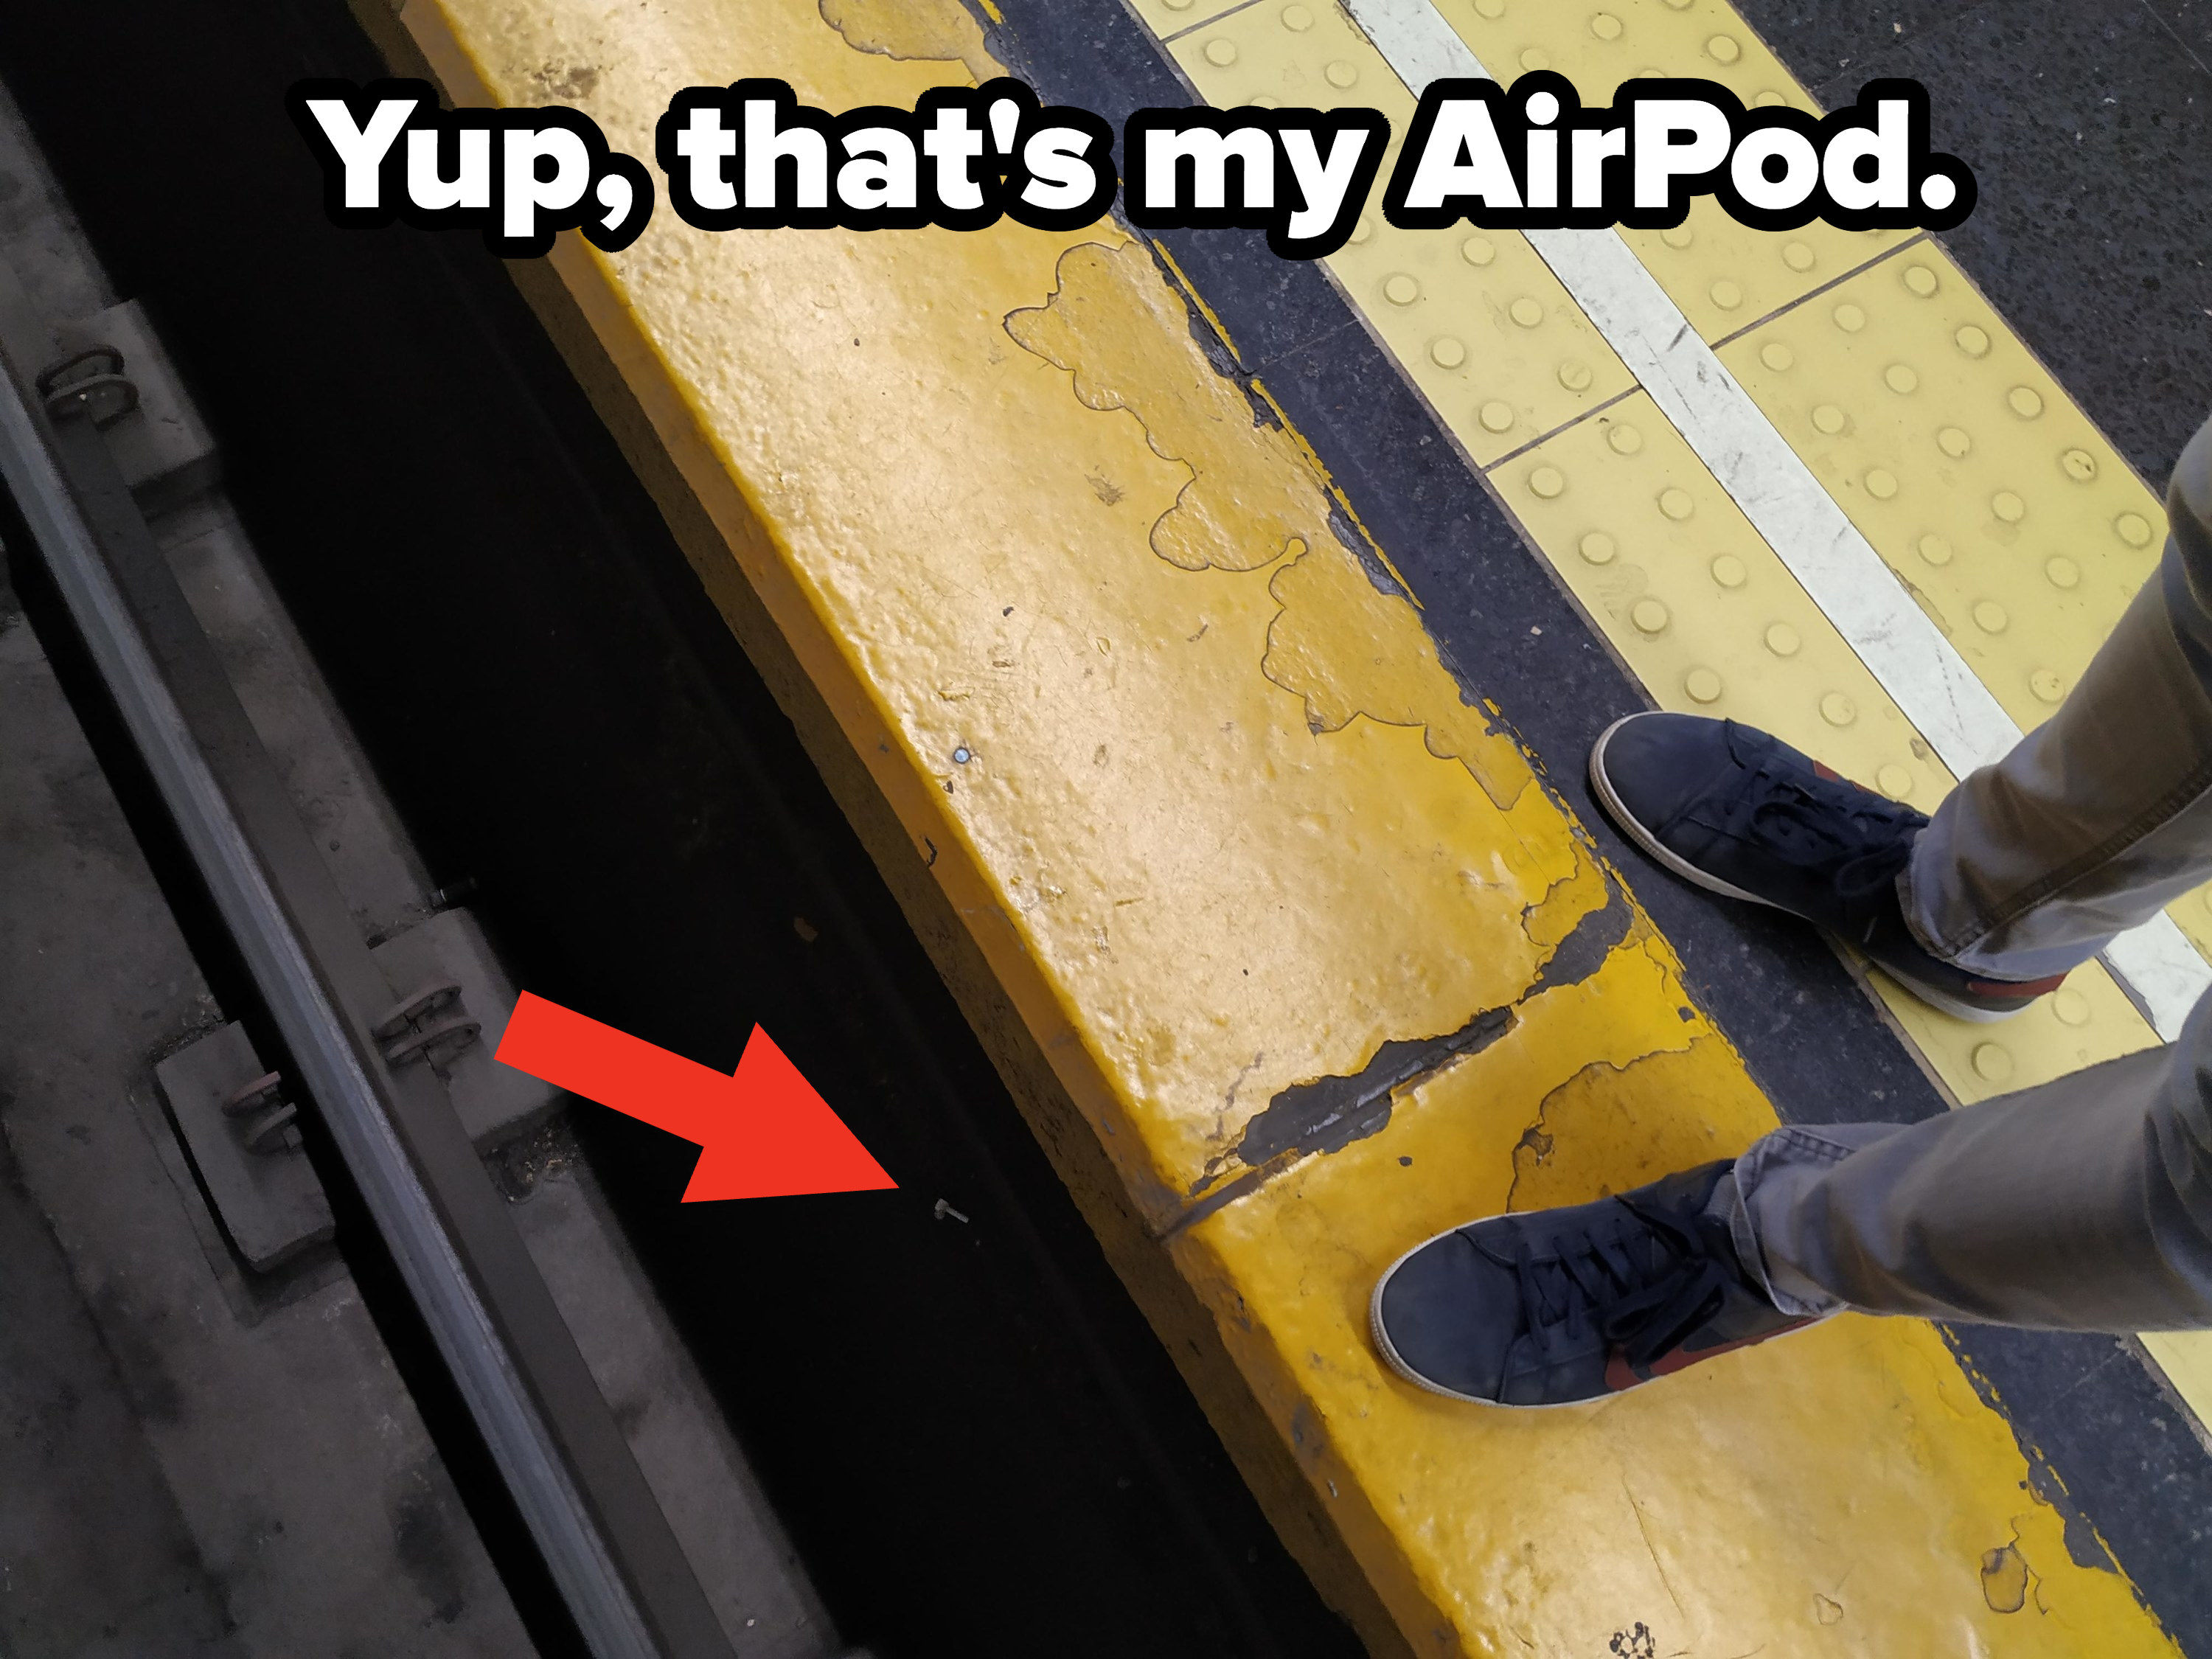 An AirPod that fell on to the subway tracks